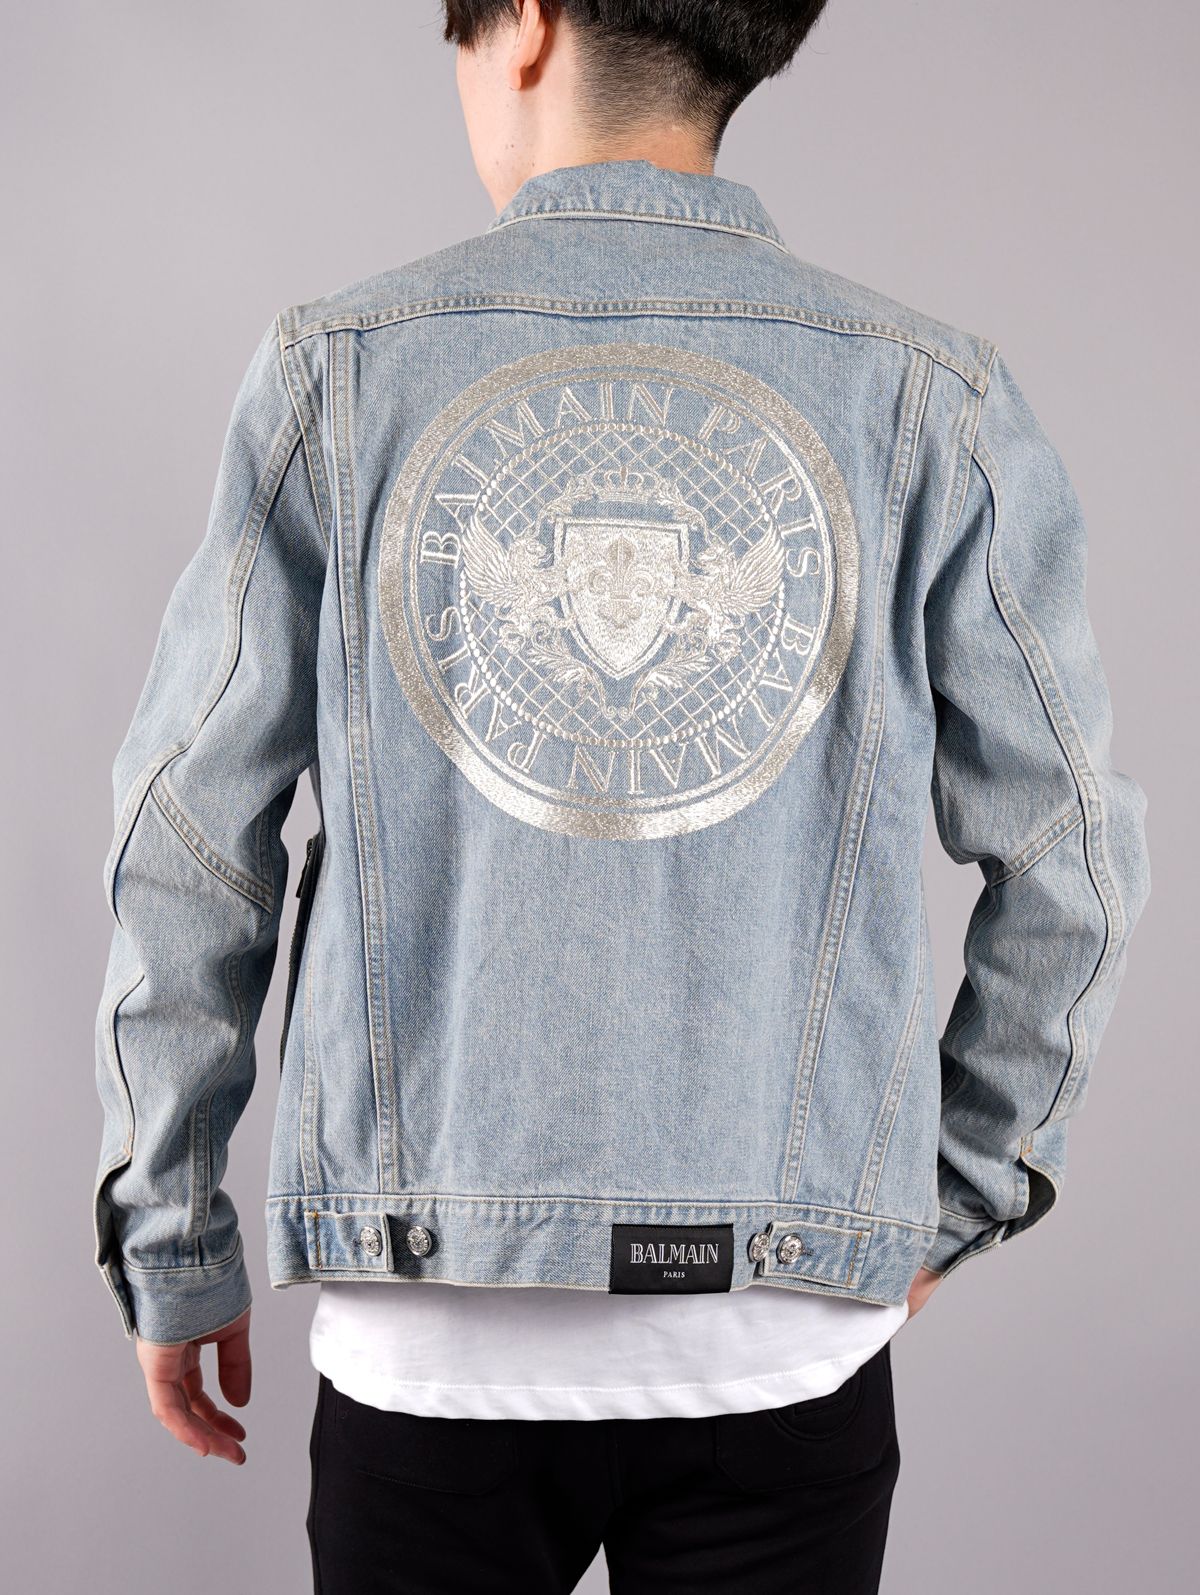 BALMAIN - DENIM JACKET WITH COIN EMBROIDERED BACK / デニム ...